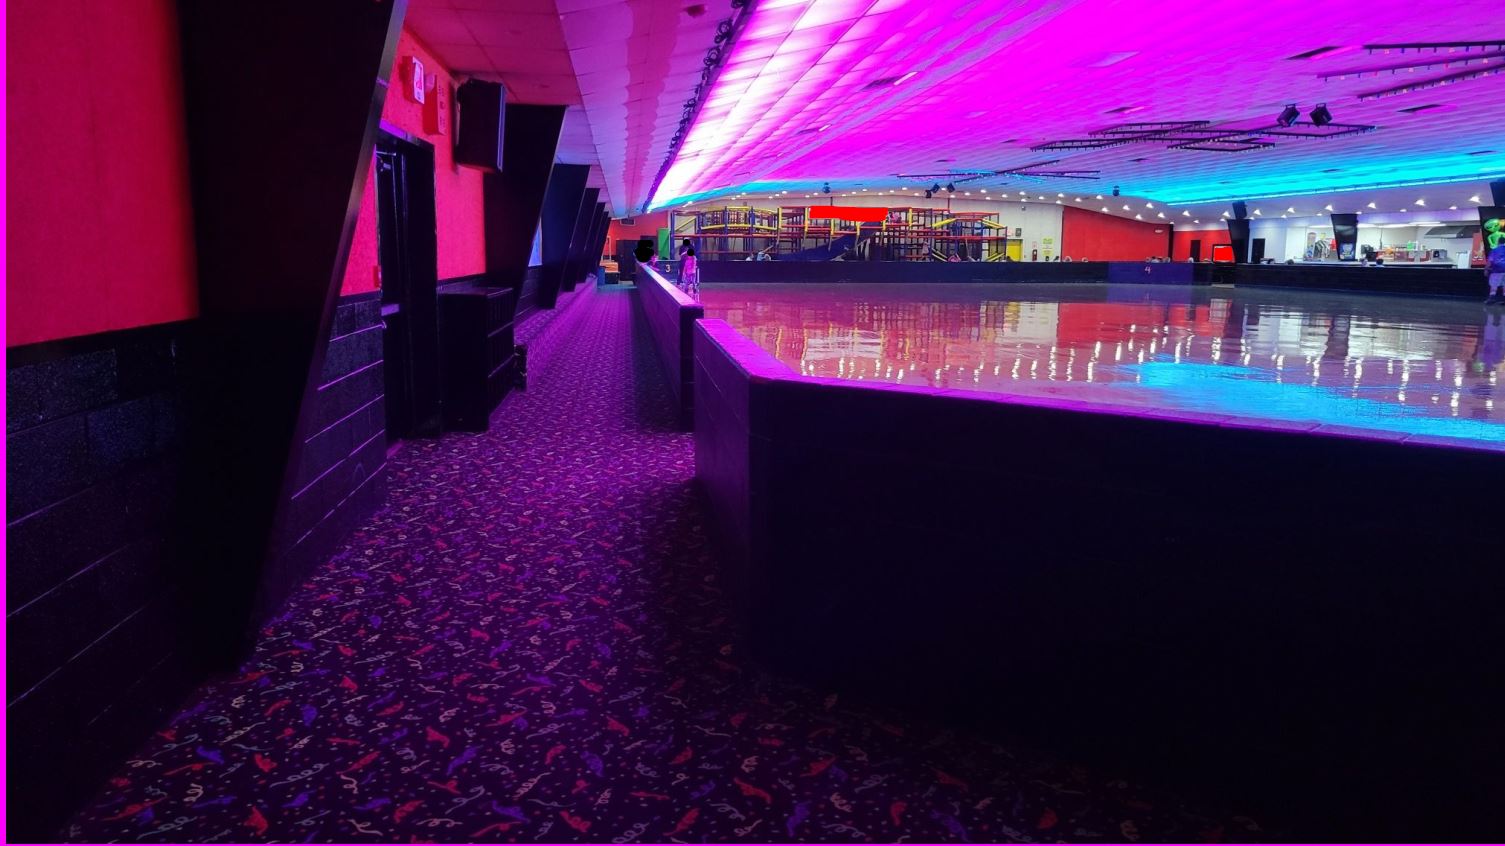 Indoor roller rink with a pink ceiling